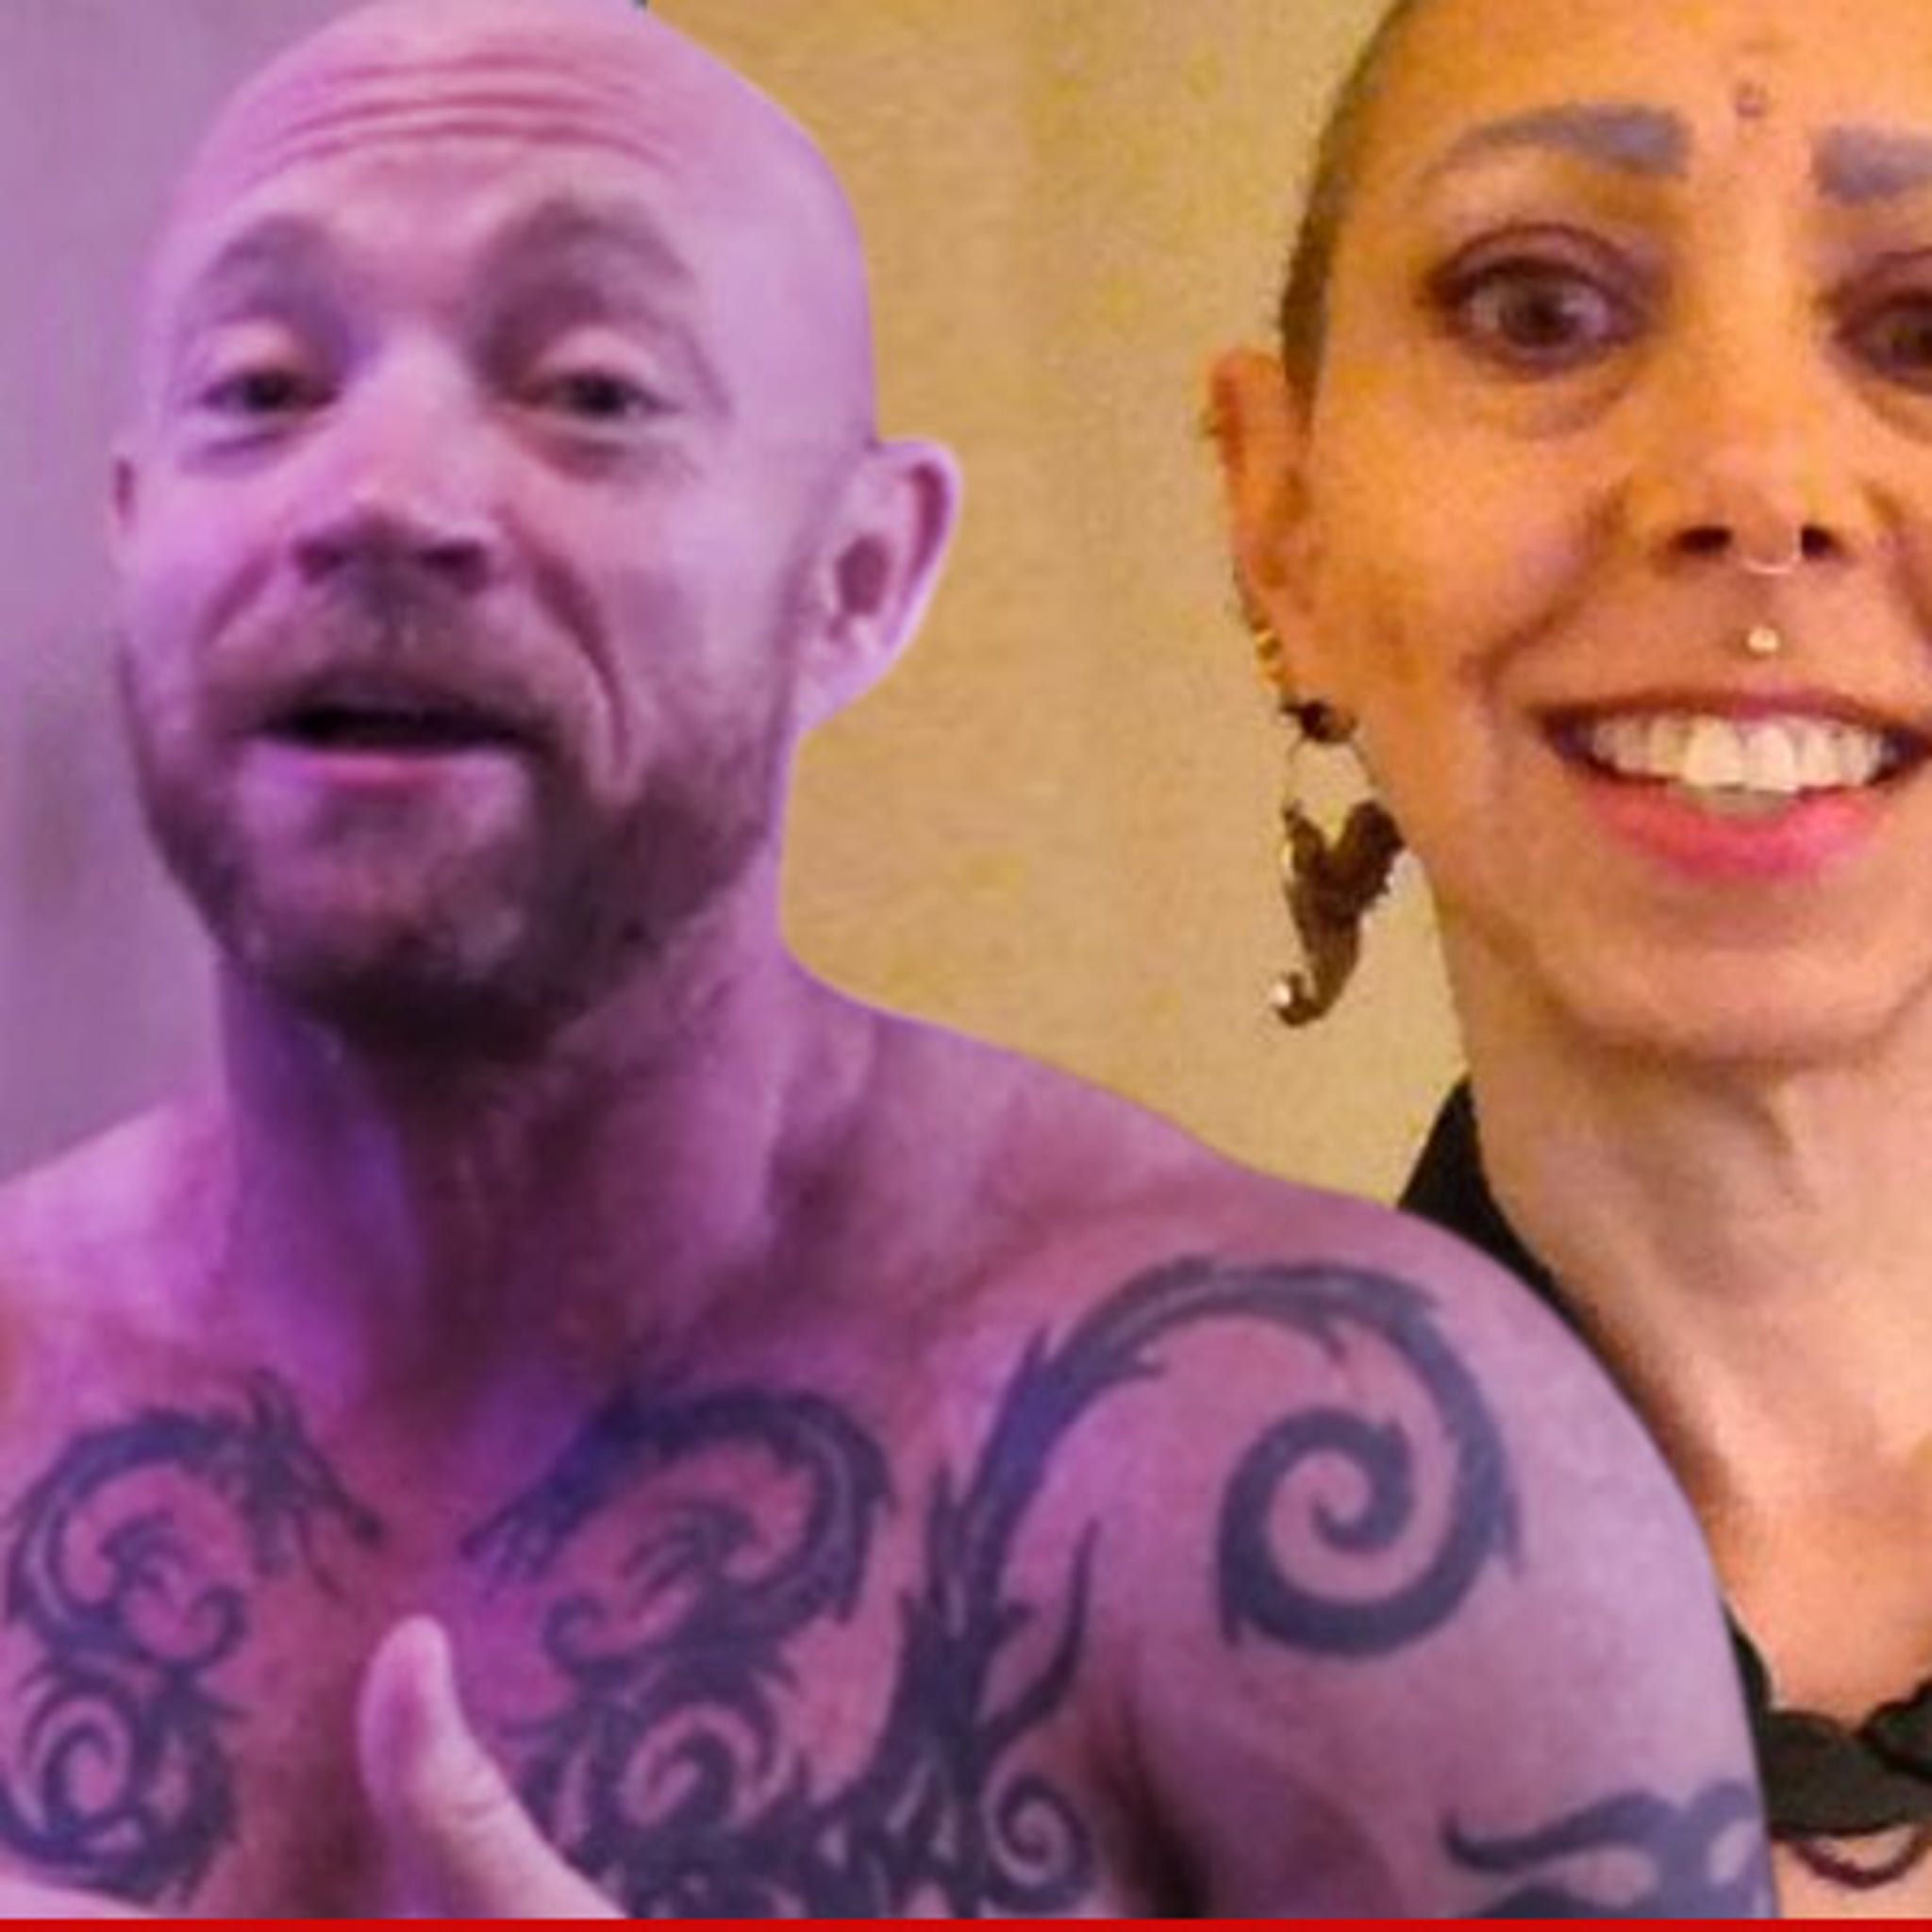 New Shemale Porn Stars 2014 - Buck Angel Divorce Battle -- Transsexual Porn Star Involved in Bitter Fight